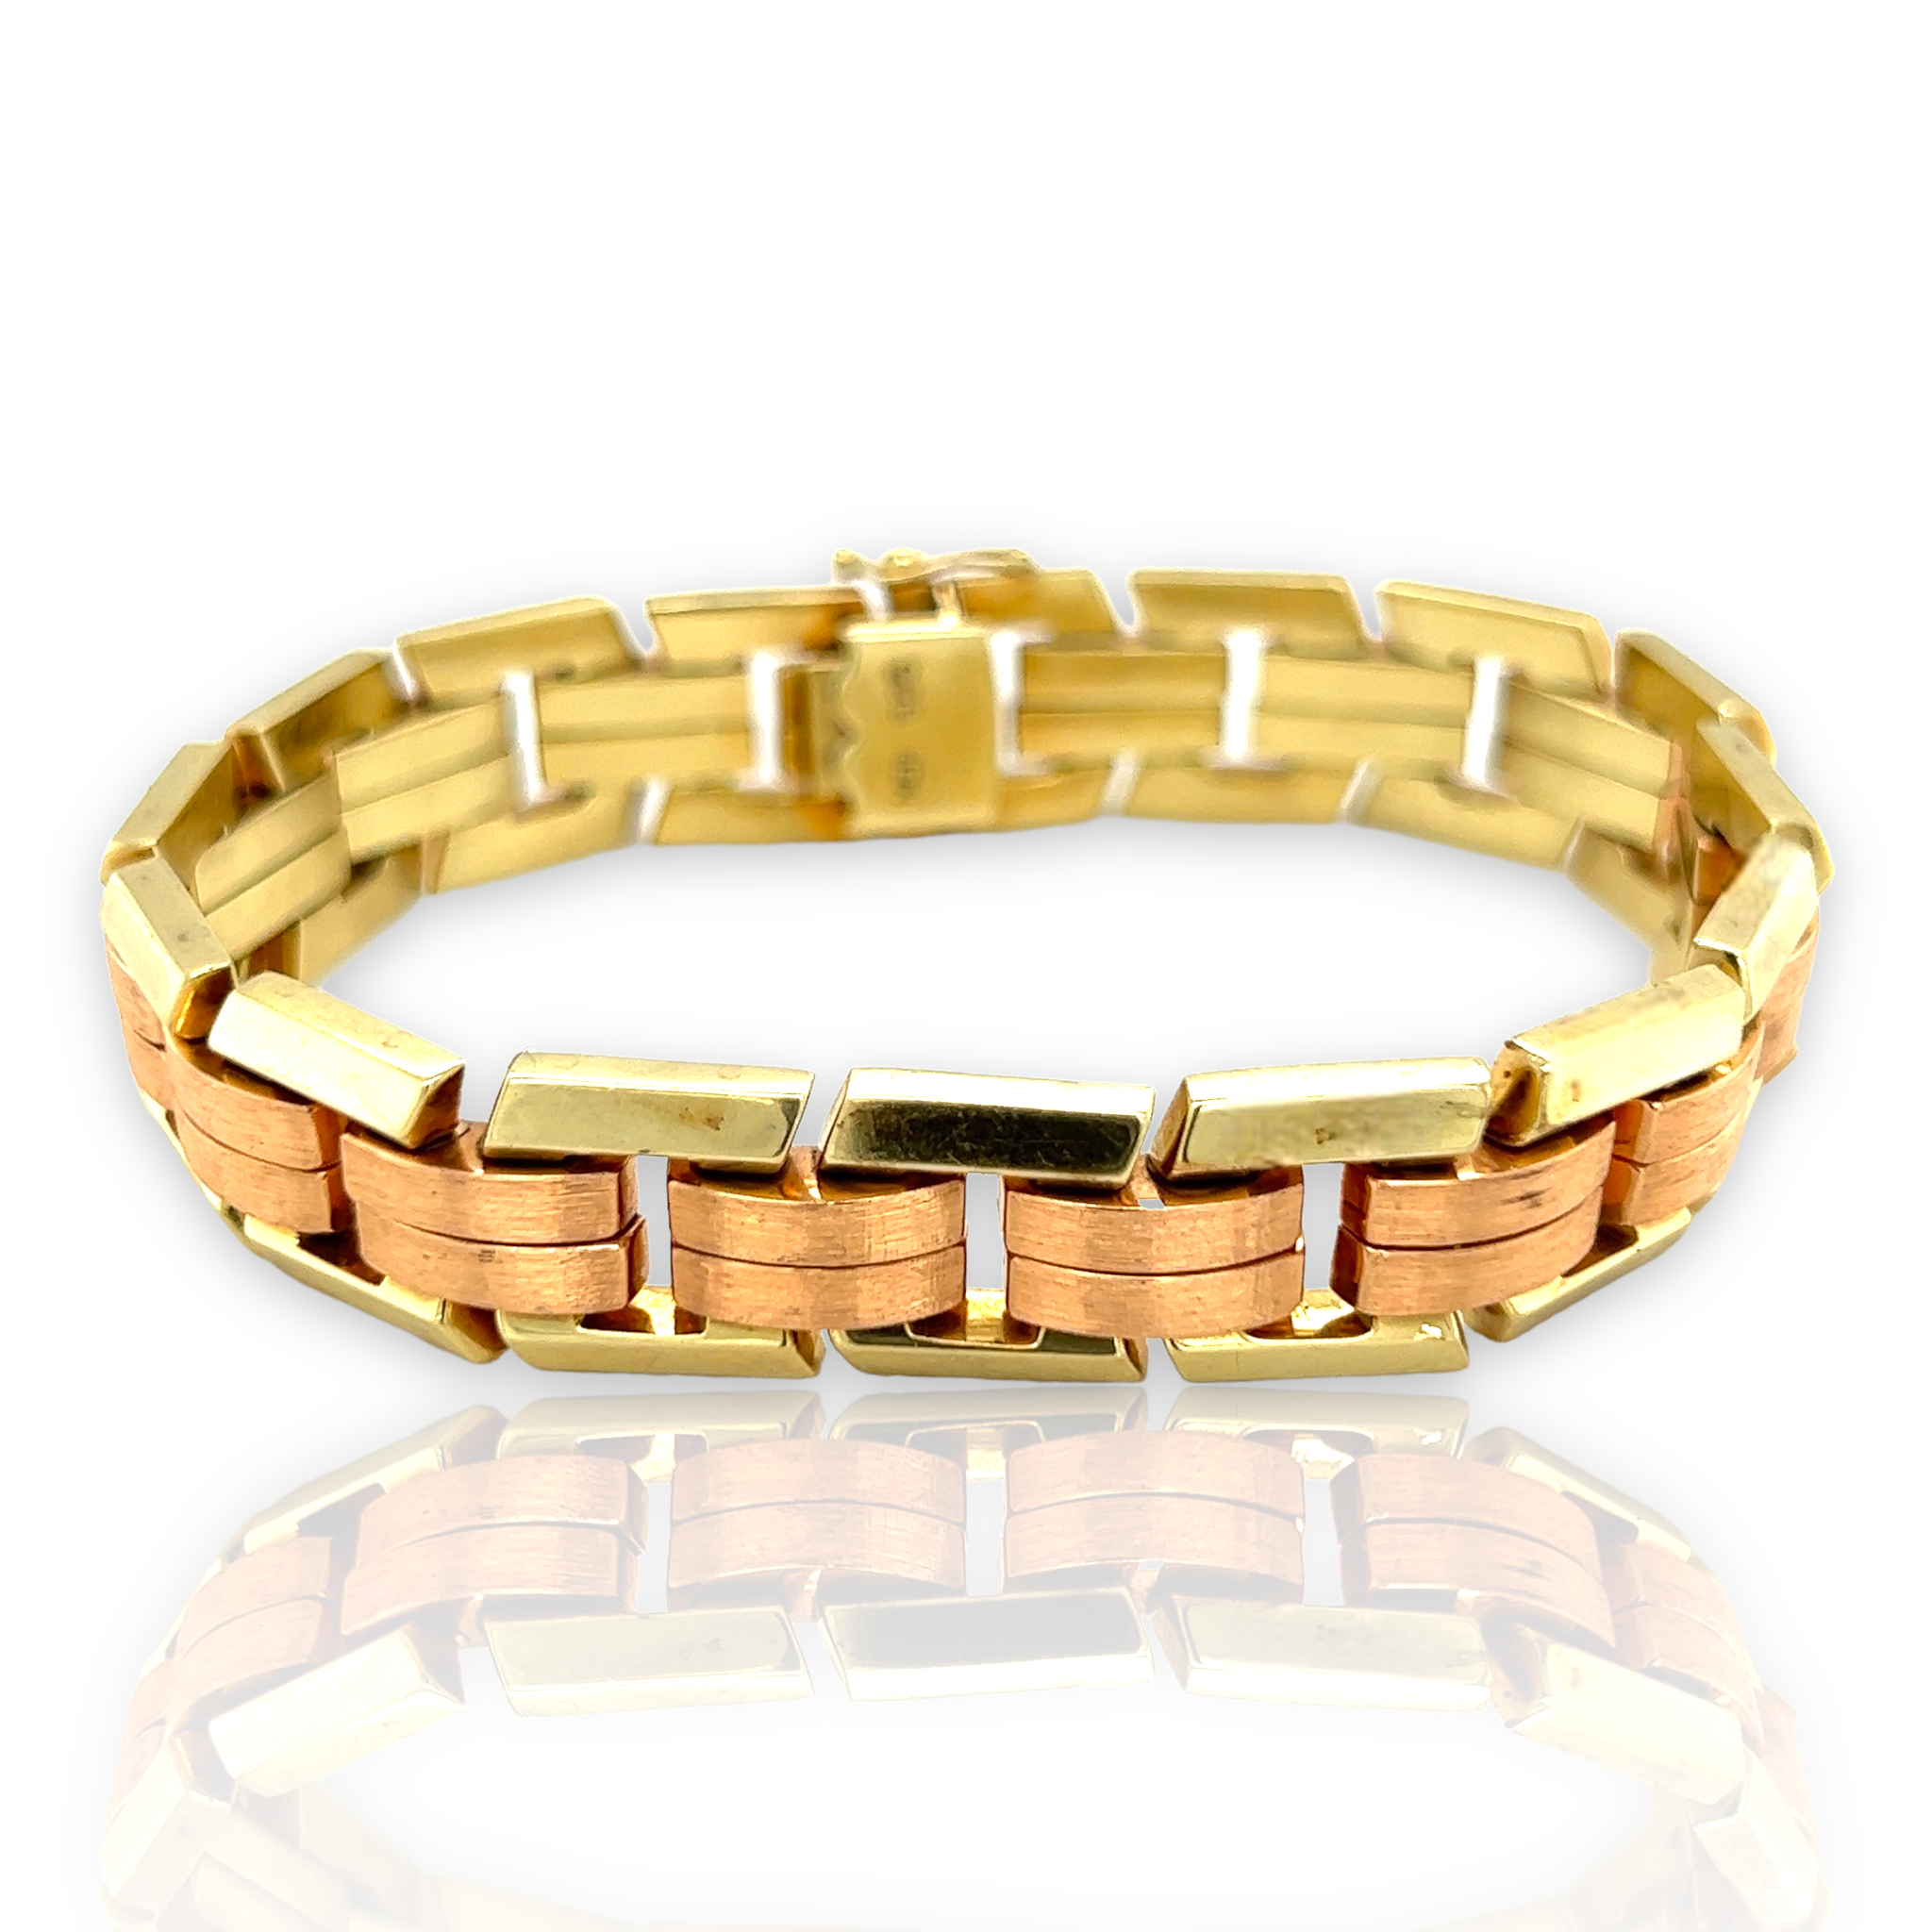 14 ct Gold Bracelet for sale in Co. Cork for €3,799 on DoneDeal